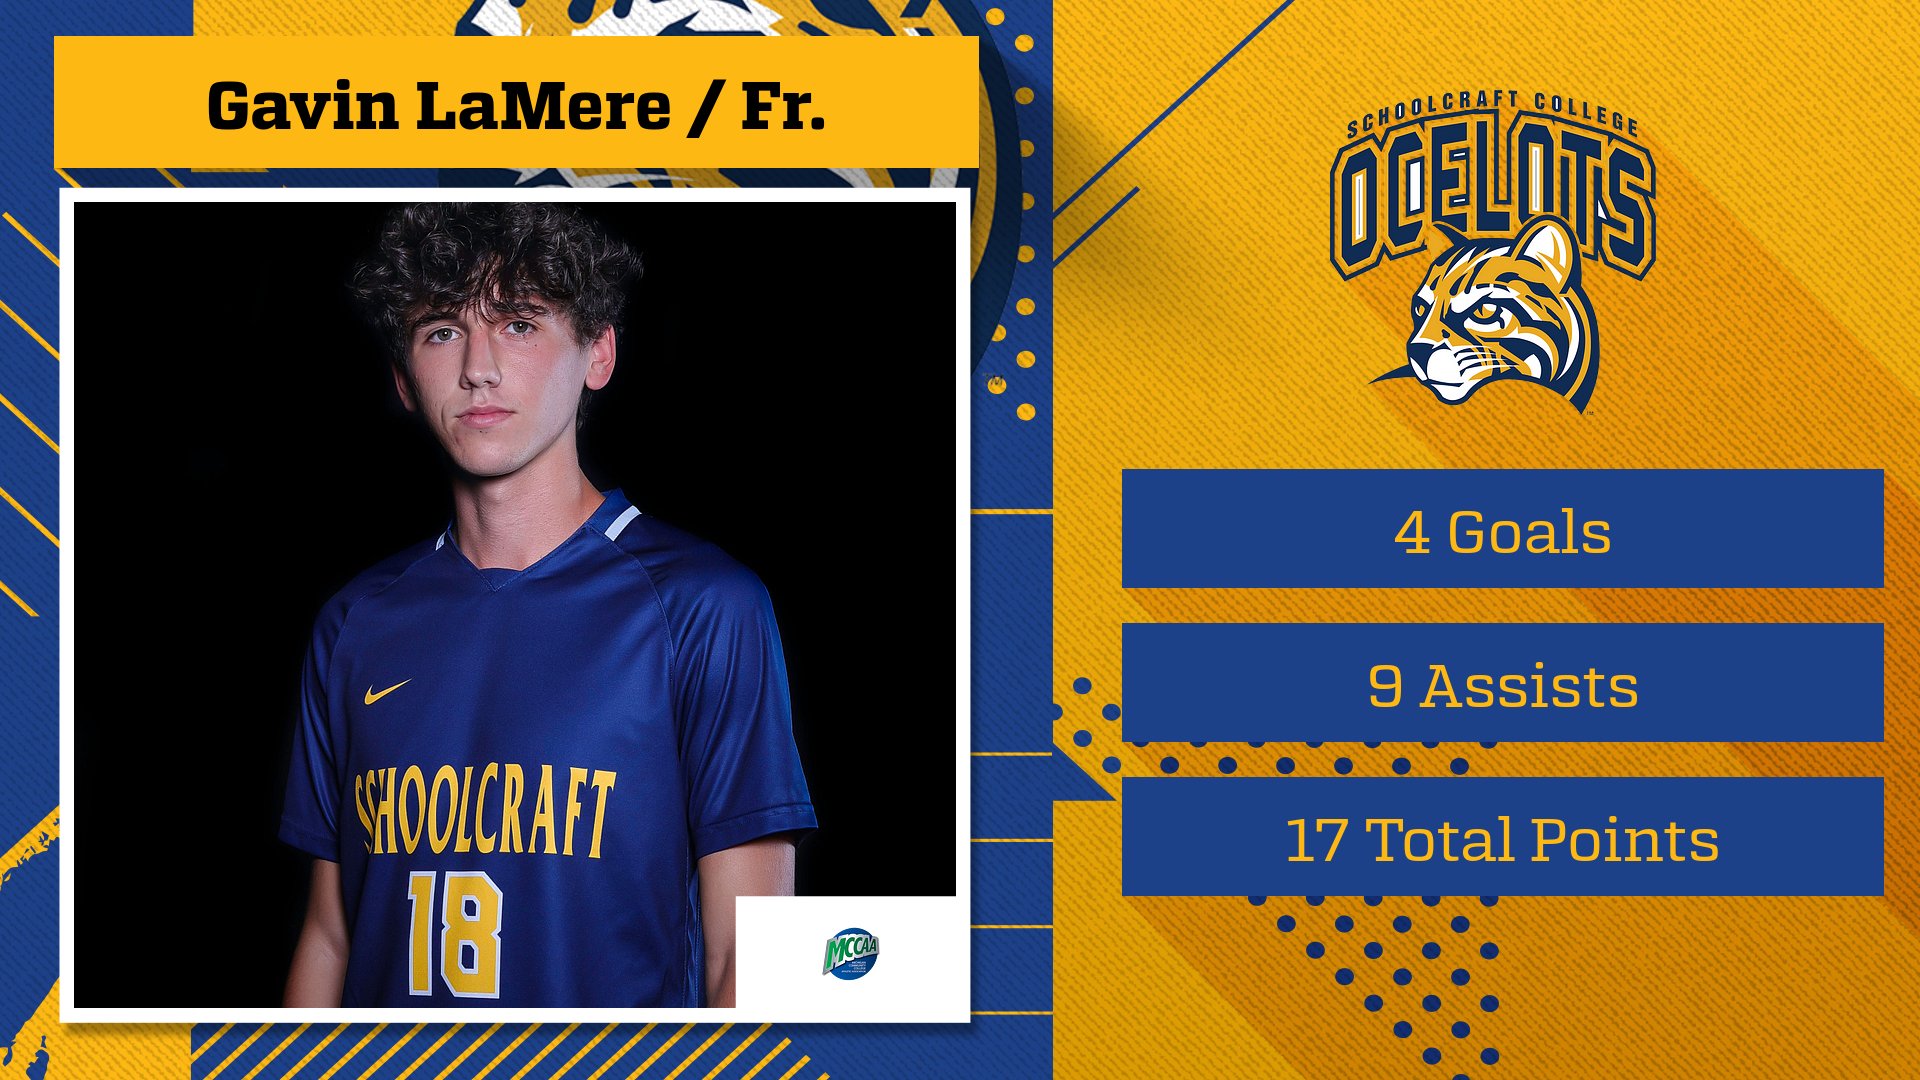 Gavin LaMere, Schoolcraft College, is the MCCAA Men's Soccer Player of the Week#5